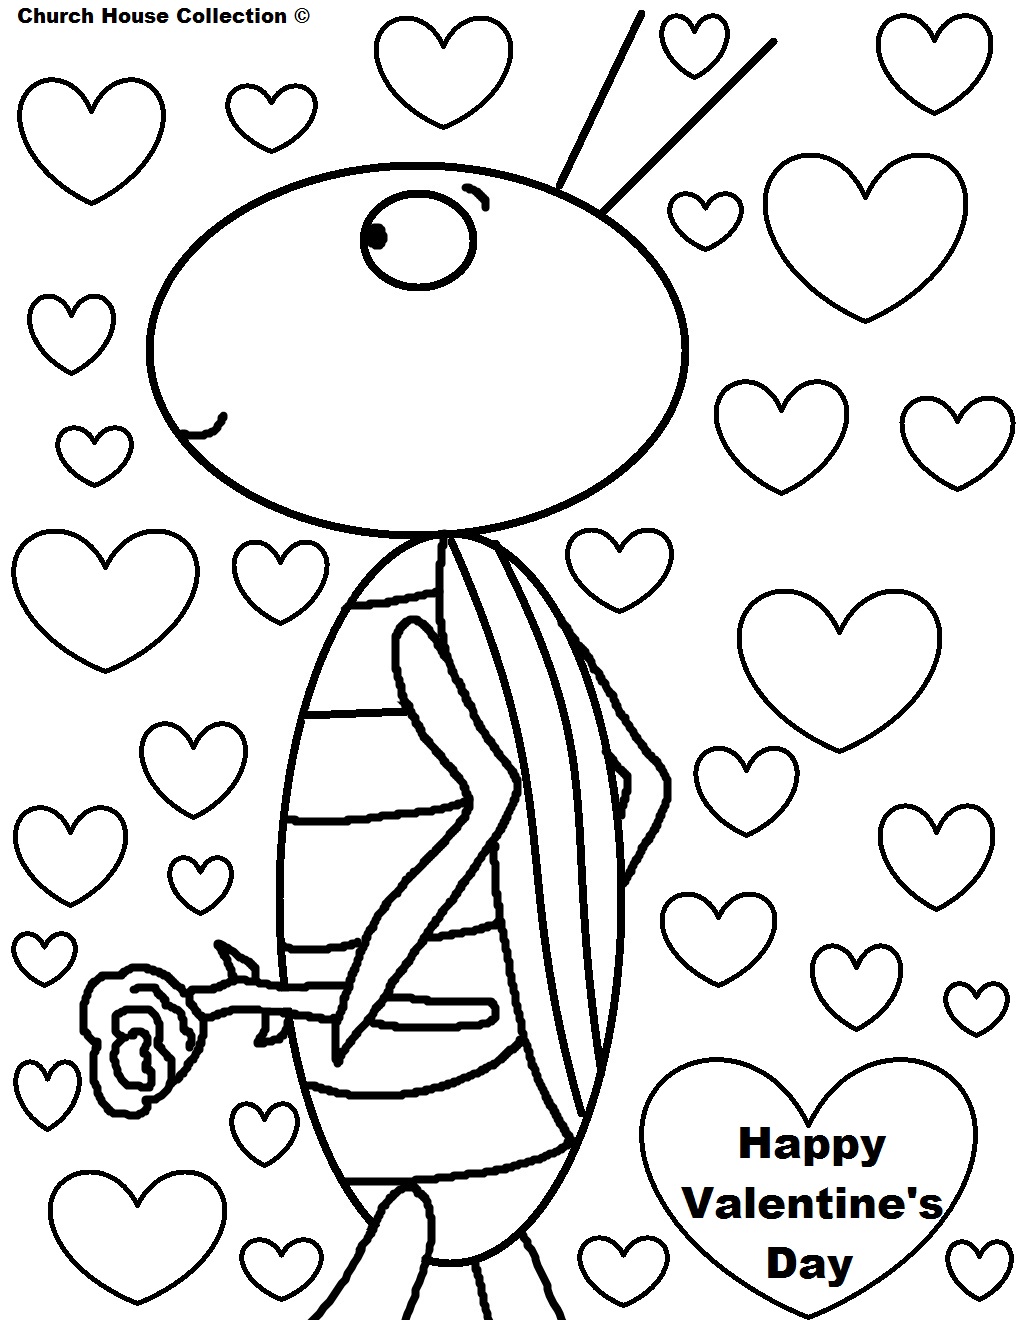 Church House Collection Blog  Valentine S Day Coloring Pages For